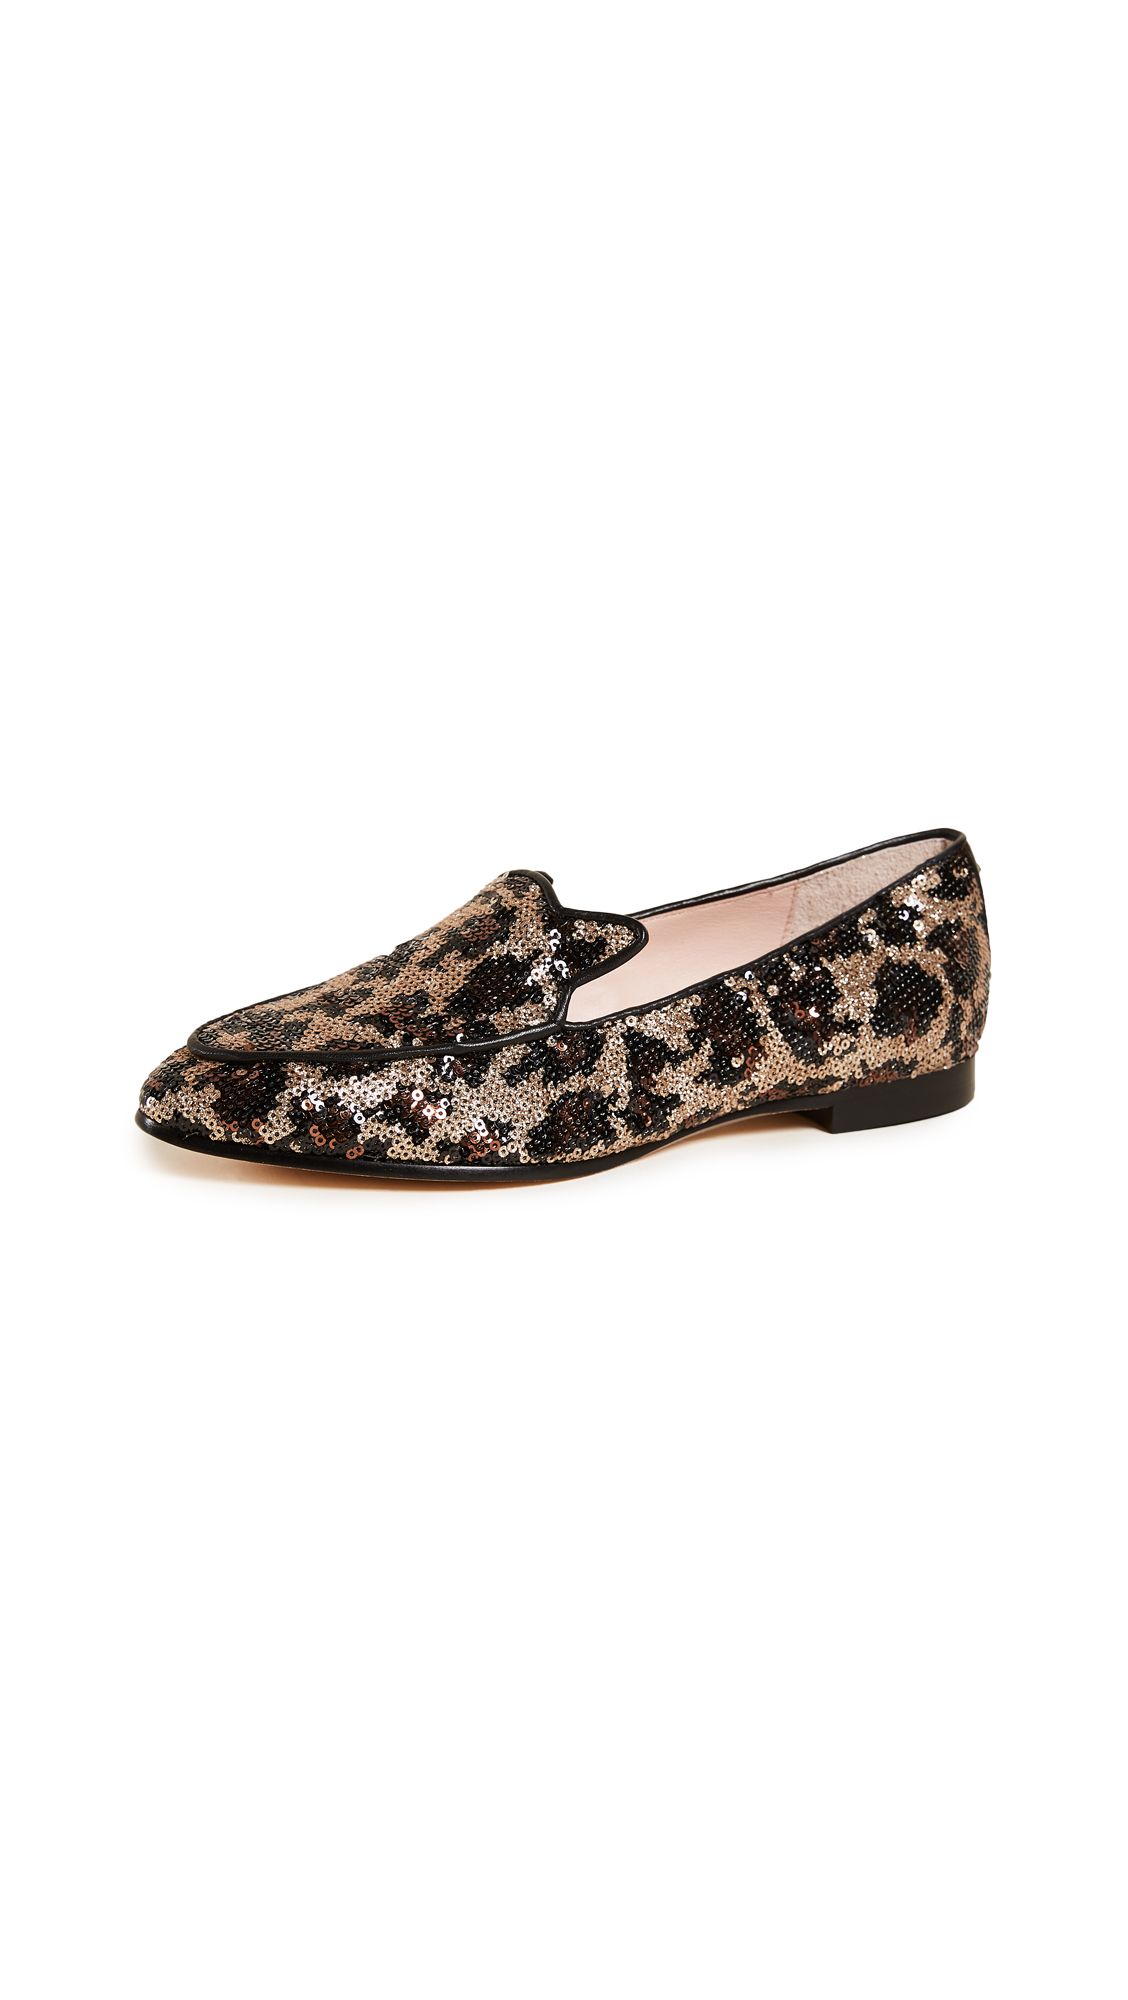 Kate Spade New York Caty Sequin Slip On Loafers | Shopbop